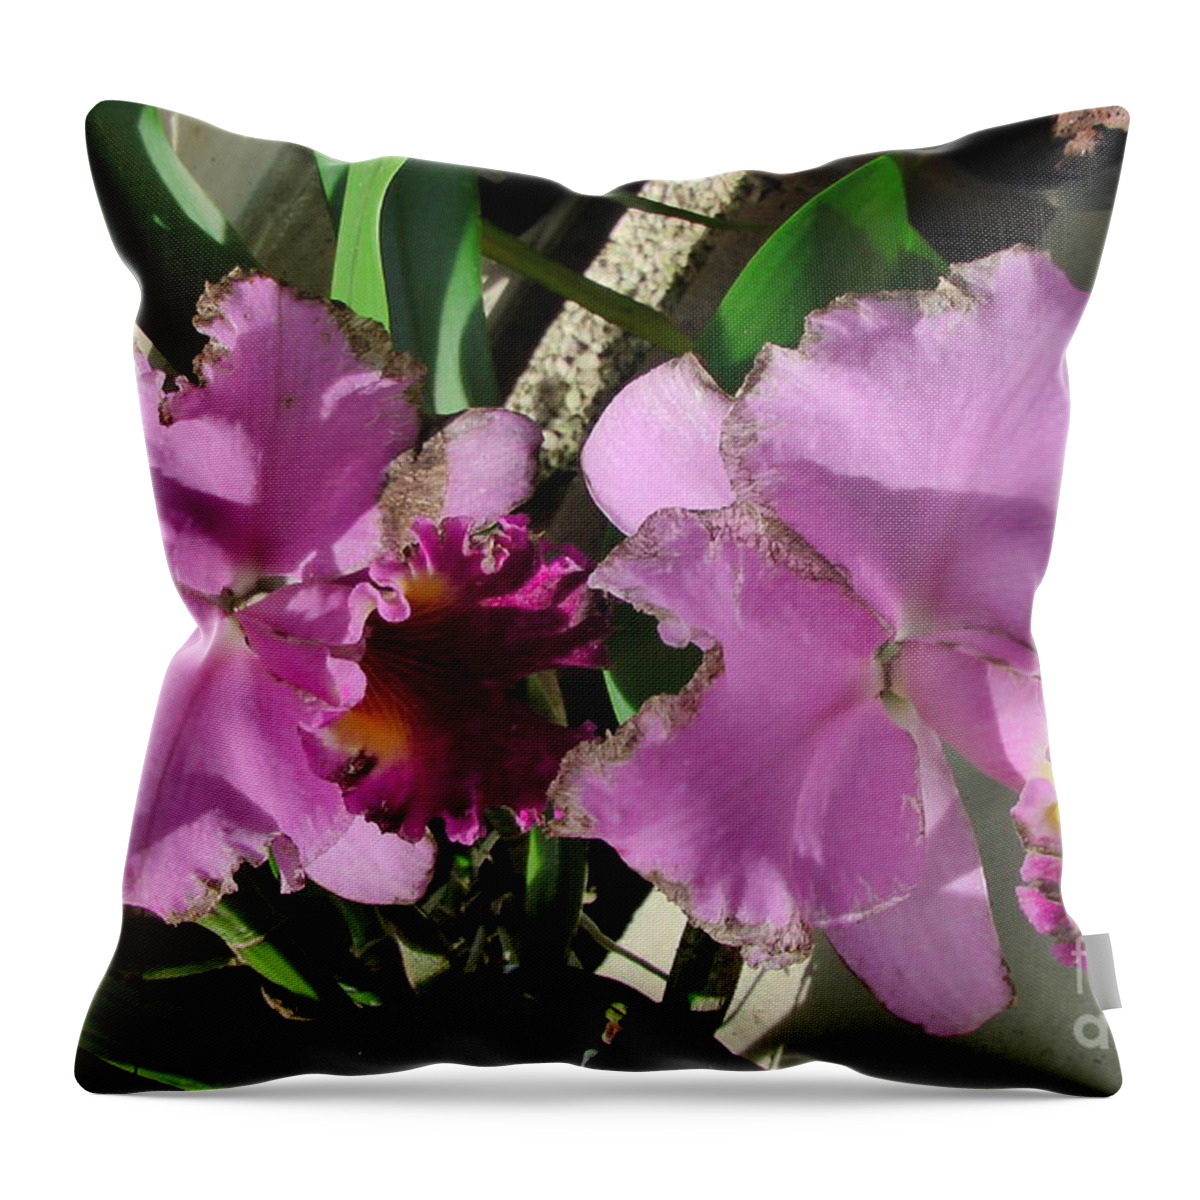 Landscape Throw Pillow featuring the photograph Orchids 12 by Snejana Videlova